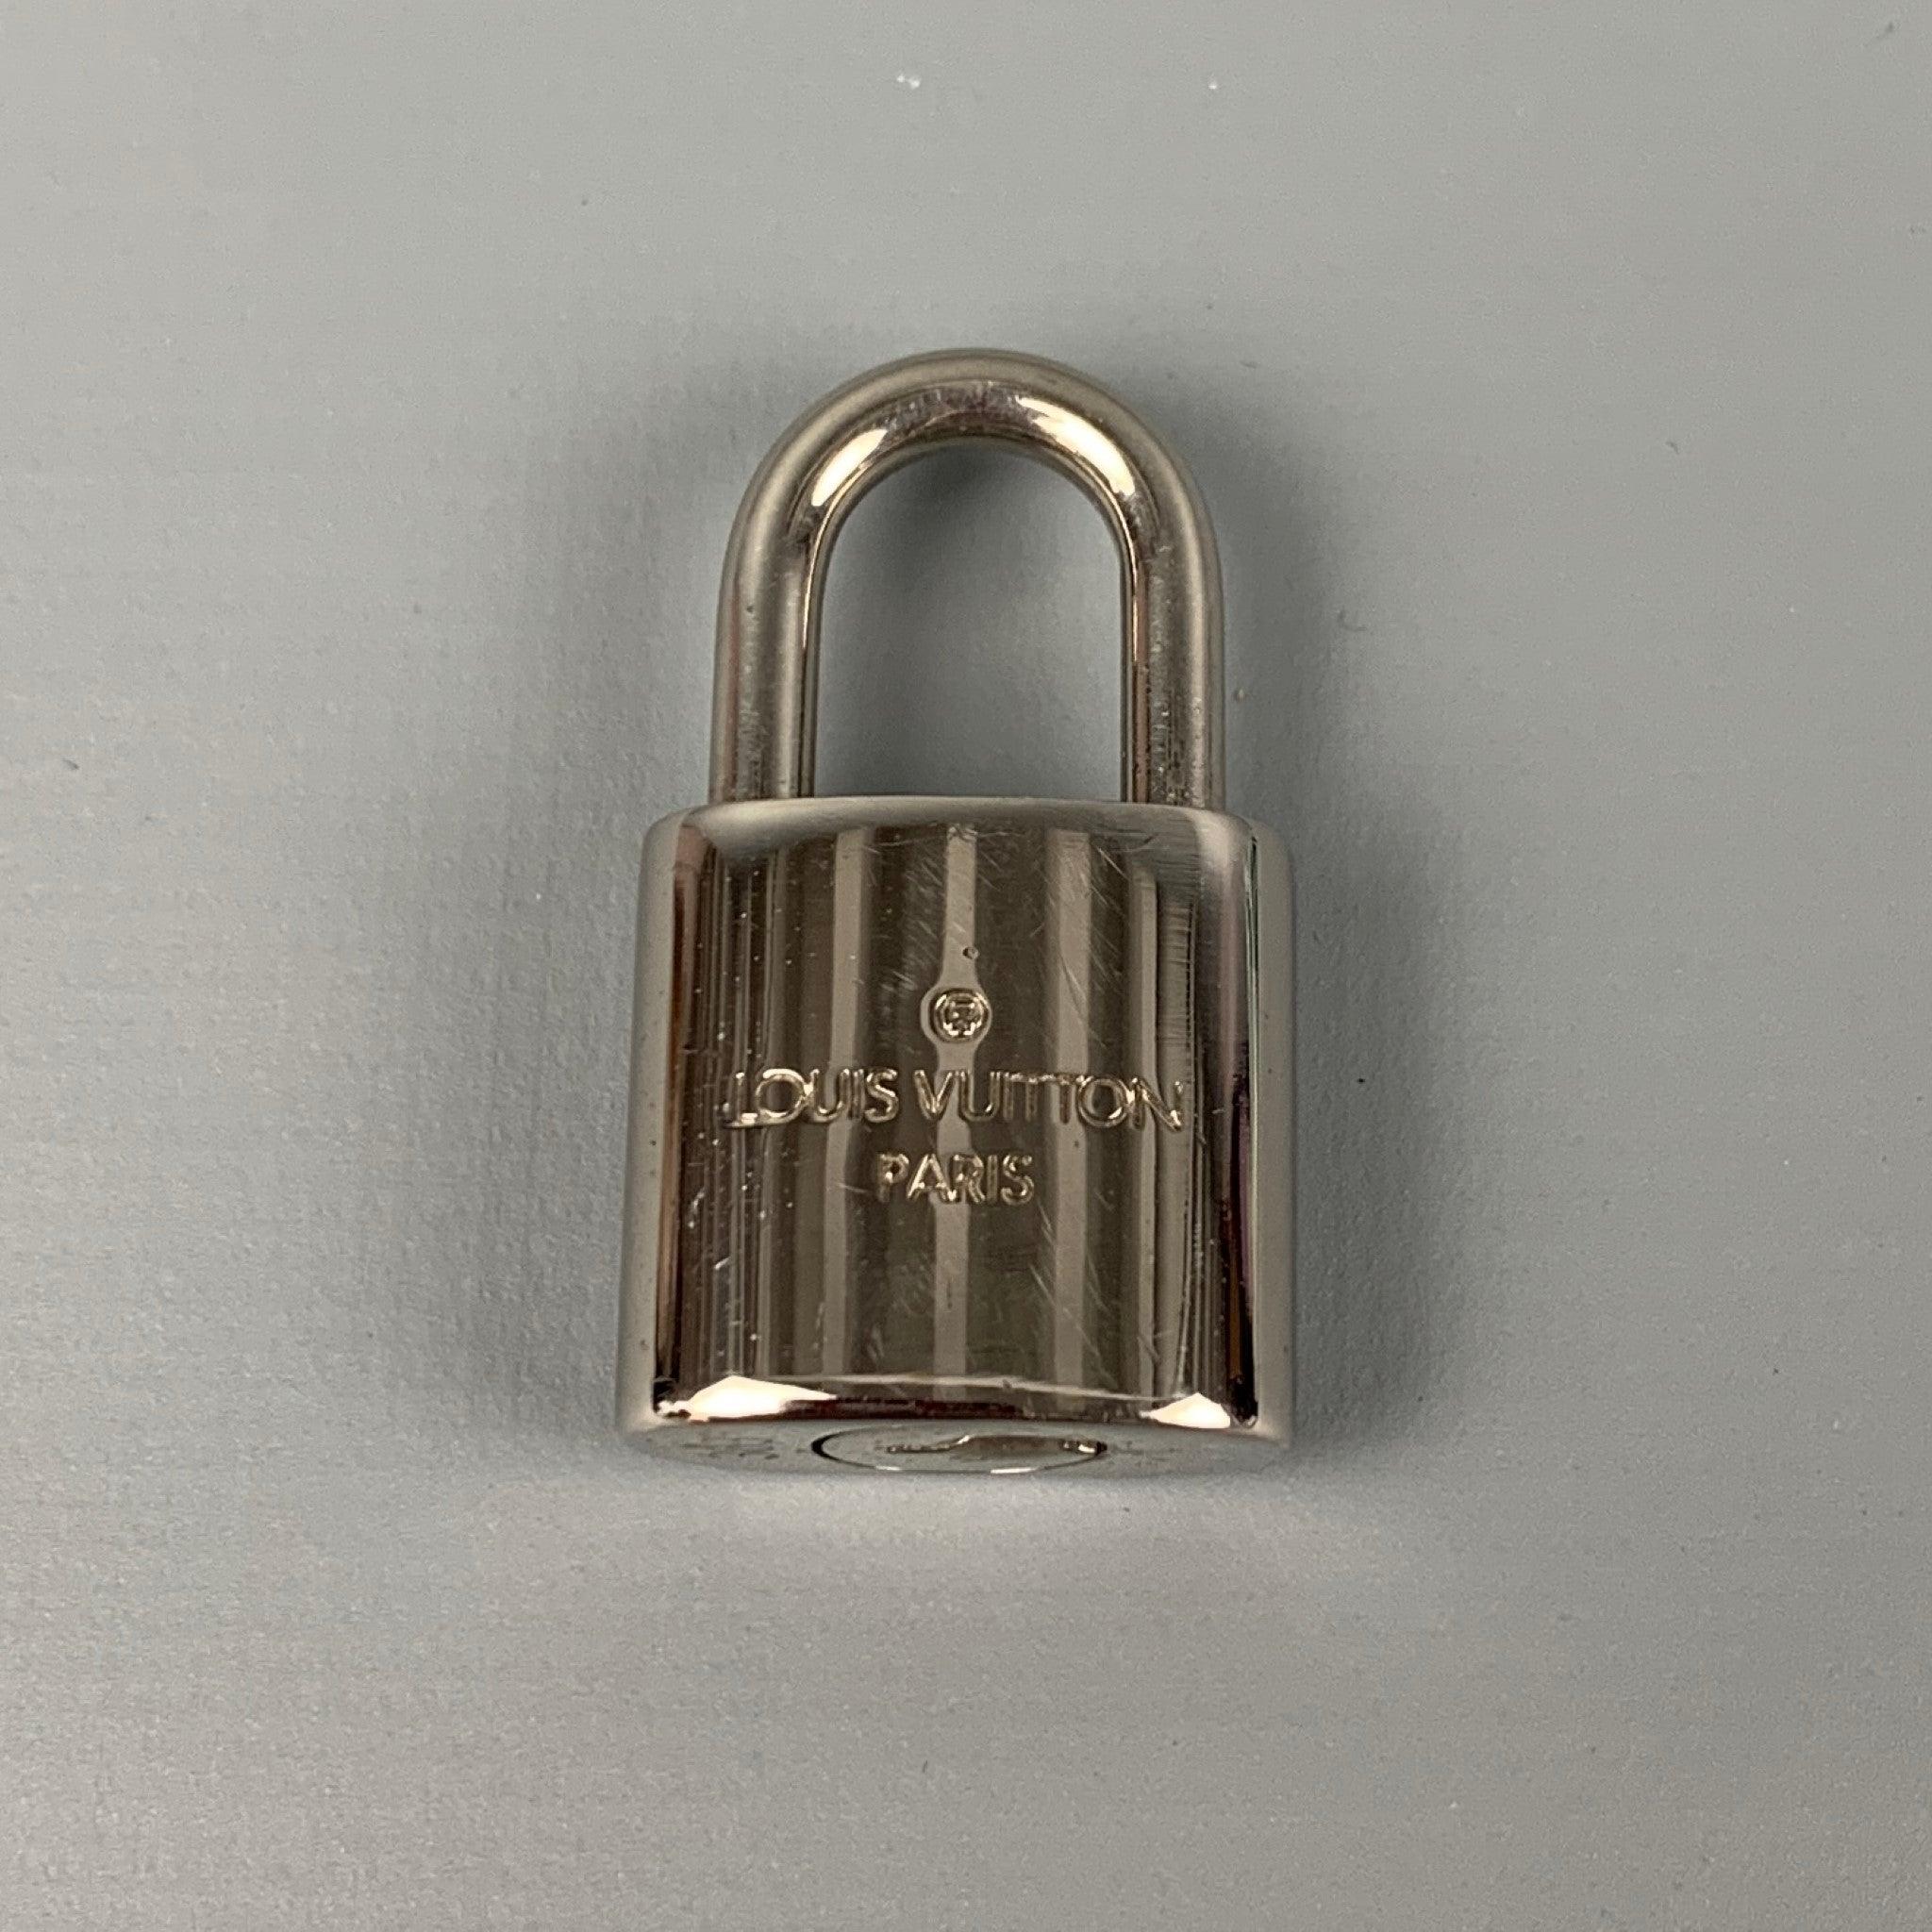 LOUIS VUITTON 303 Silver Metal Padlock & Key In Good Condition For Sale In San Francisco, CA